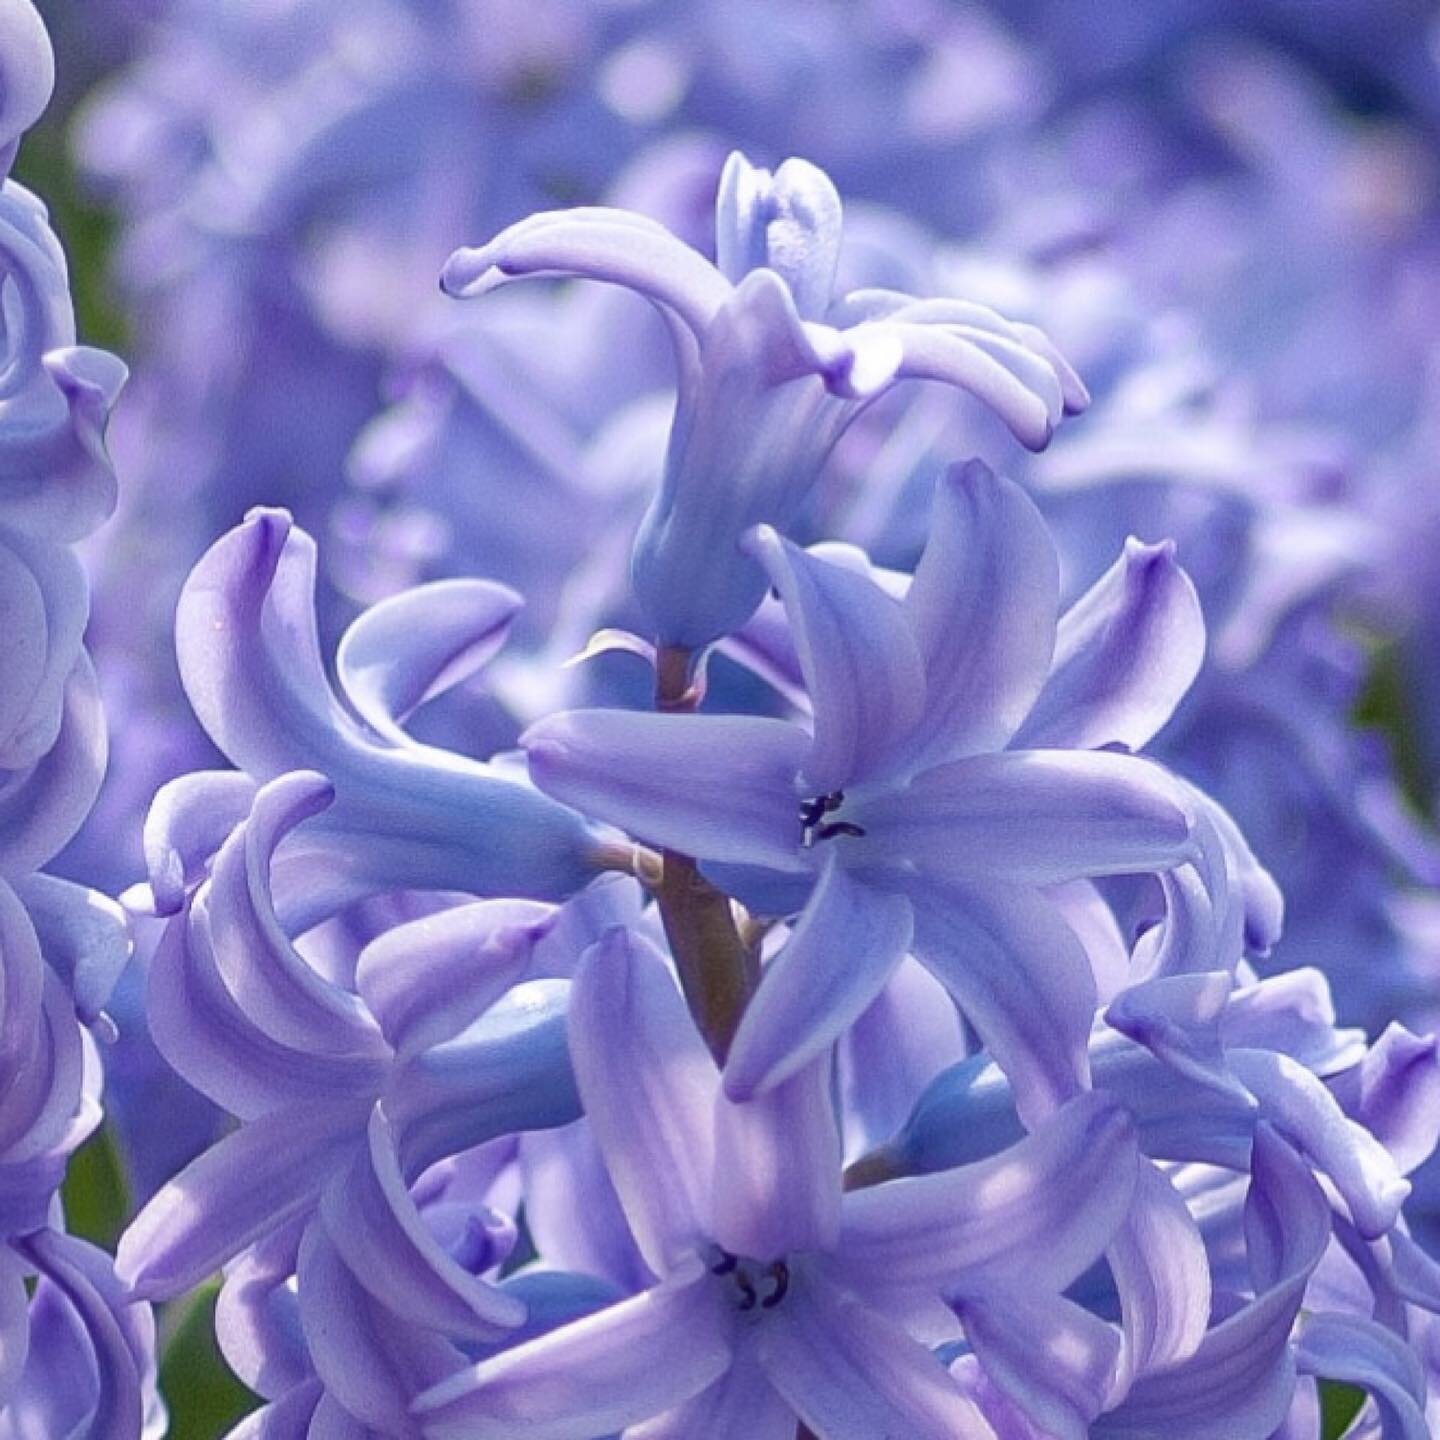 Handling hyacinth bulbs can cause mild skin irritation because they contain oxalic acid. Oxalic acid is commonly used in laundries as an acid rinse effective in removing rust stains. Protective gloves are recommended.
⠀⠀⠀⠀⠀⠀⠀⠀⠀⠀⠀⠀ ⠀⠀⠀⠀⠀⠀⠀⠀⠀⠀⠀⠀
⠀⠀⠀⠀⠀⠀